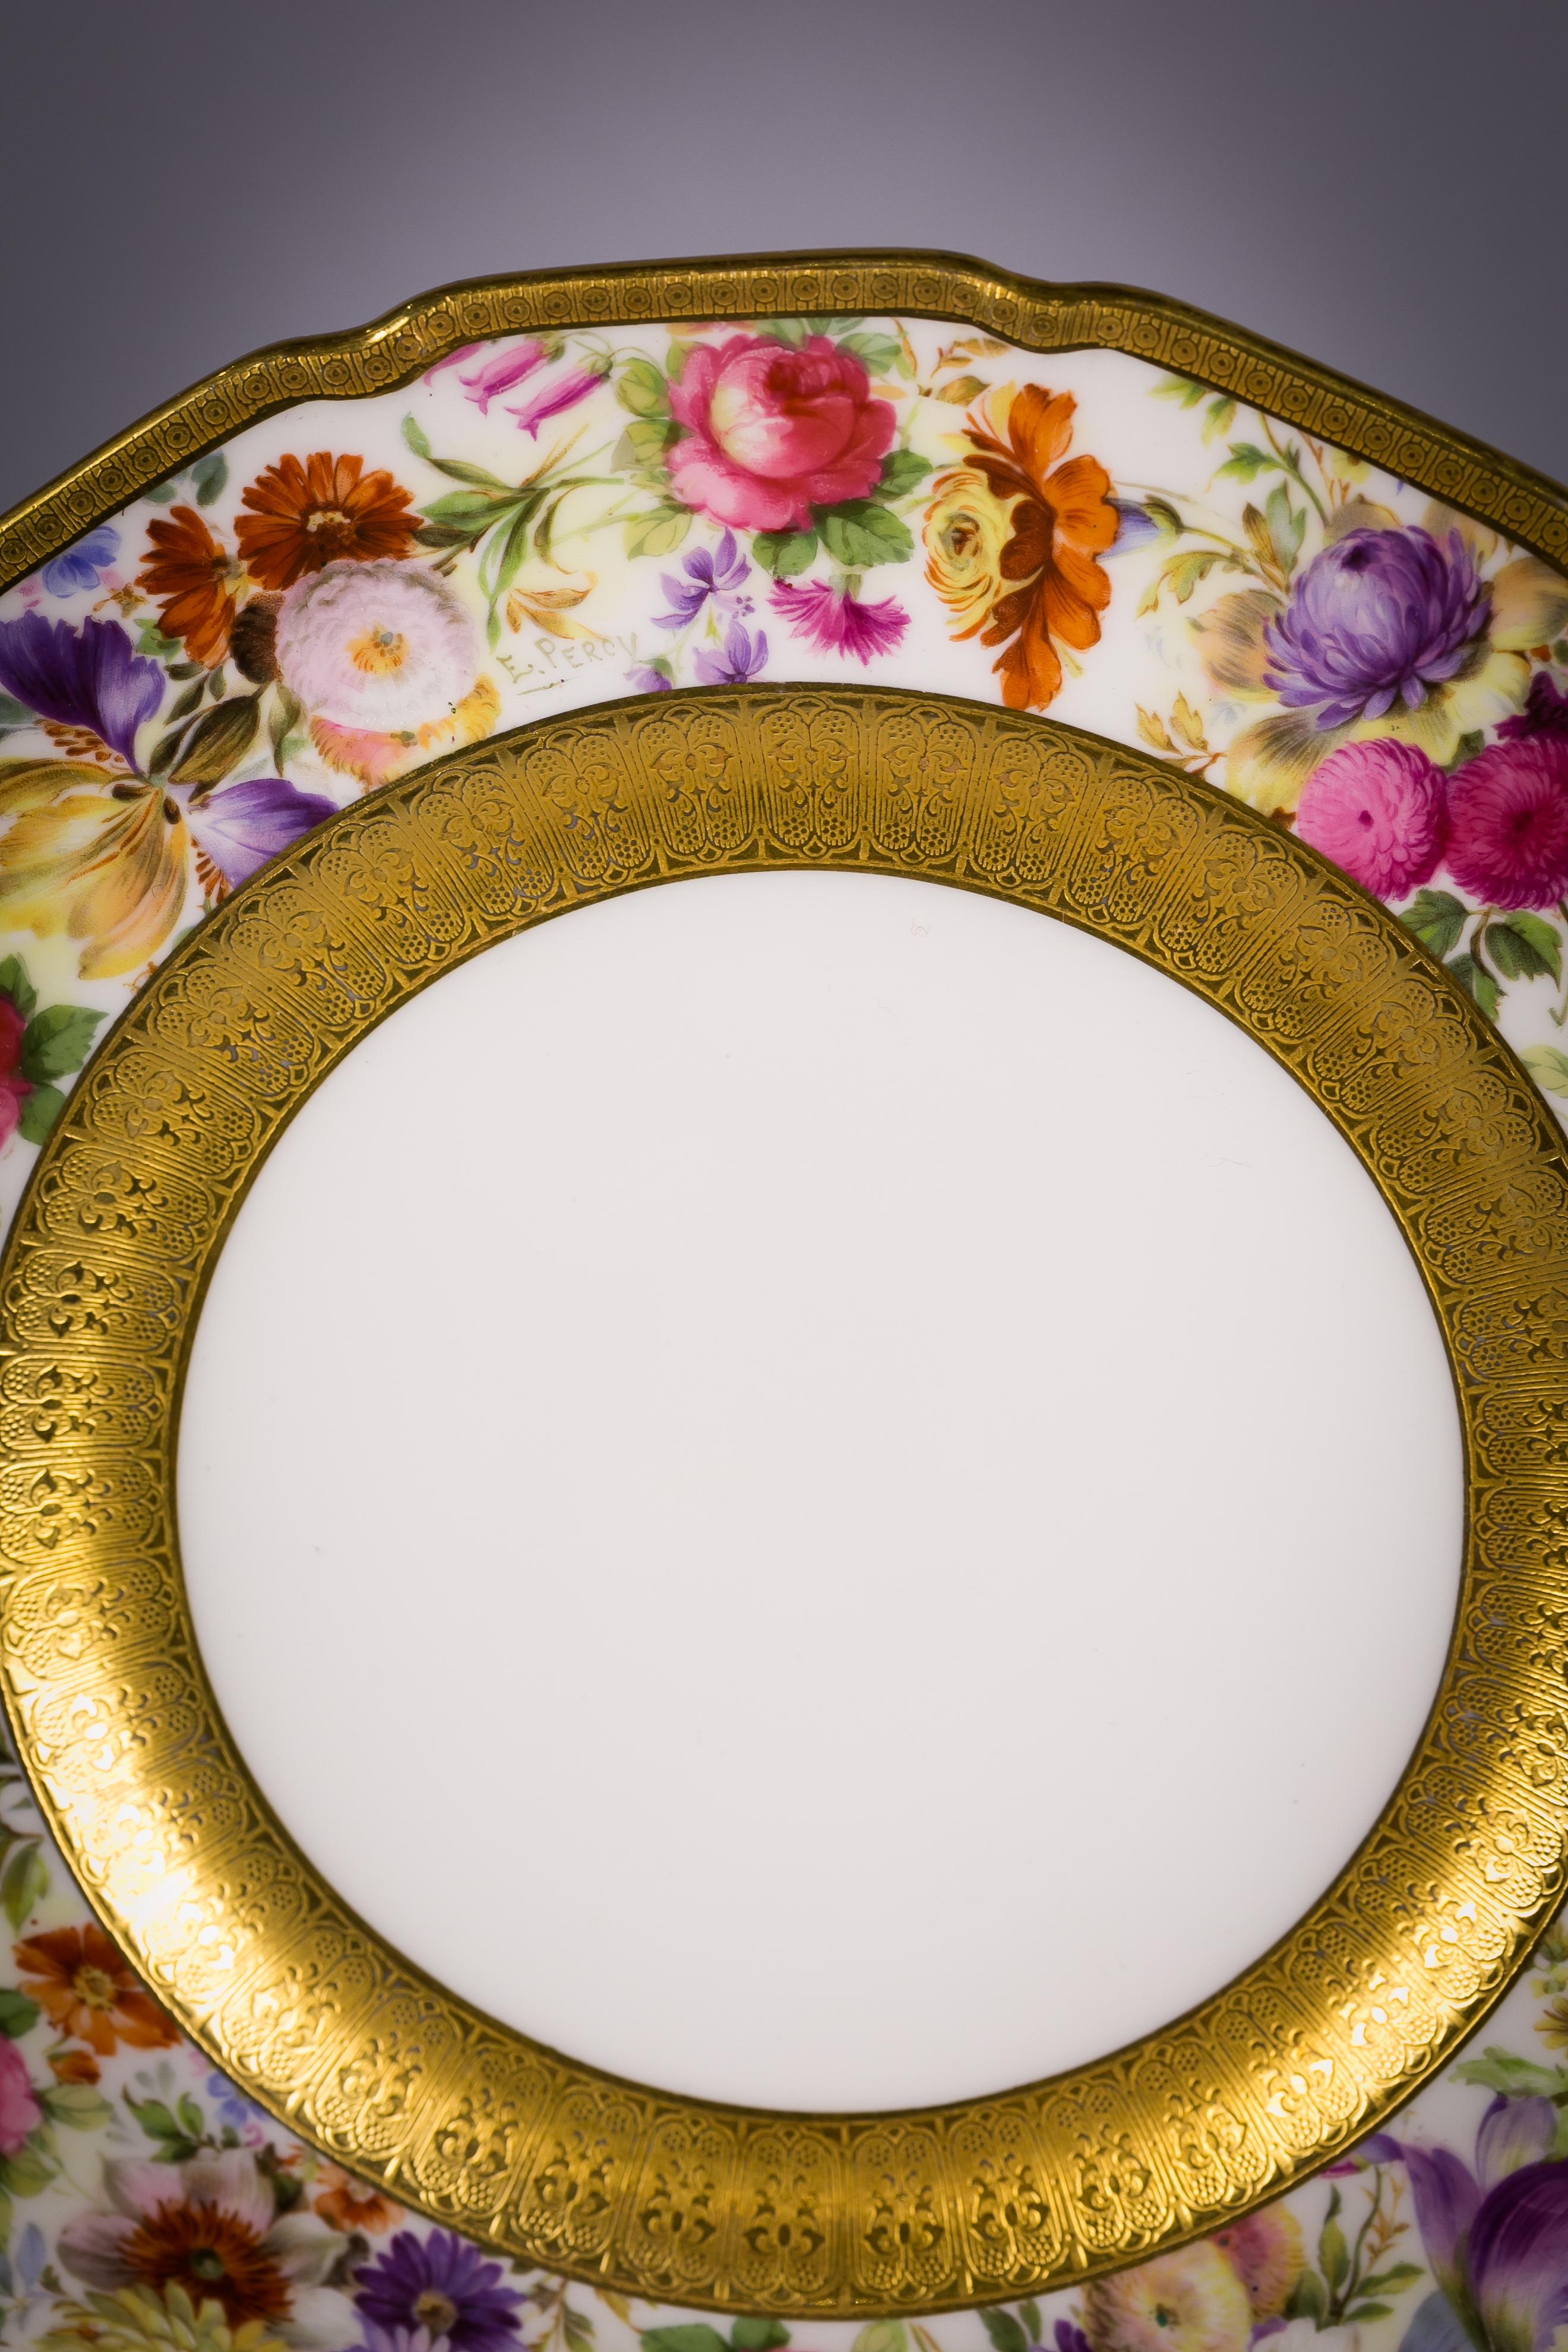 Set of Fourteen English Porcelain Dessert Plates, Royal Doulton, circa 1890 In Good Condition For Sale In New York, NY